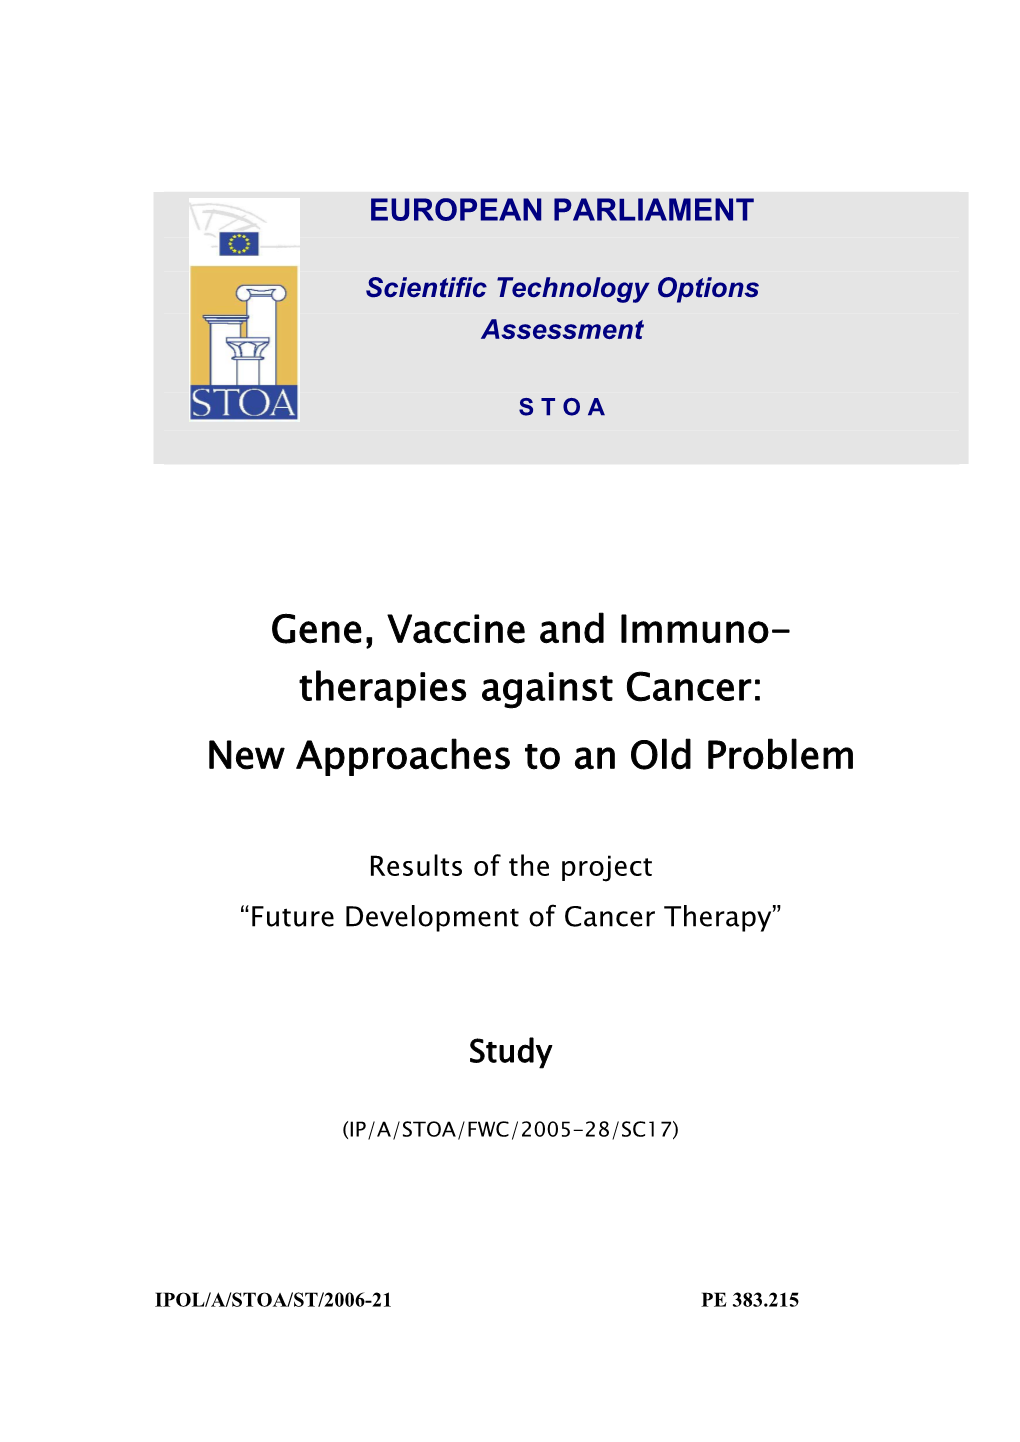 Gene, Vaccine and Immuno- Therapies Against Cancer: New Approaches to an Old Problem